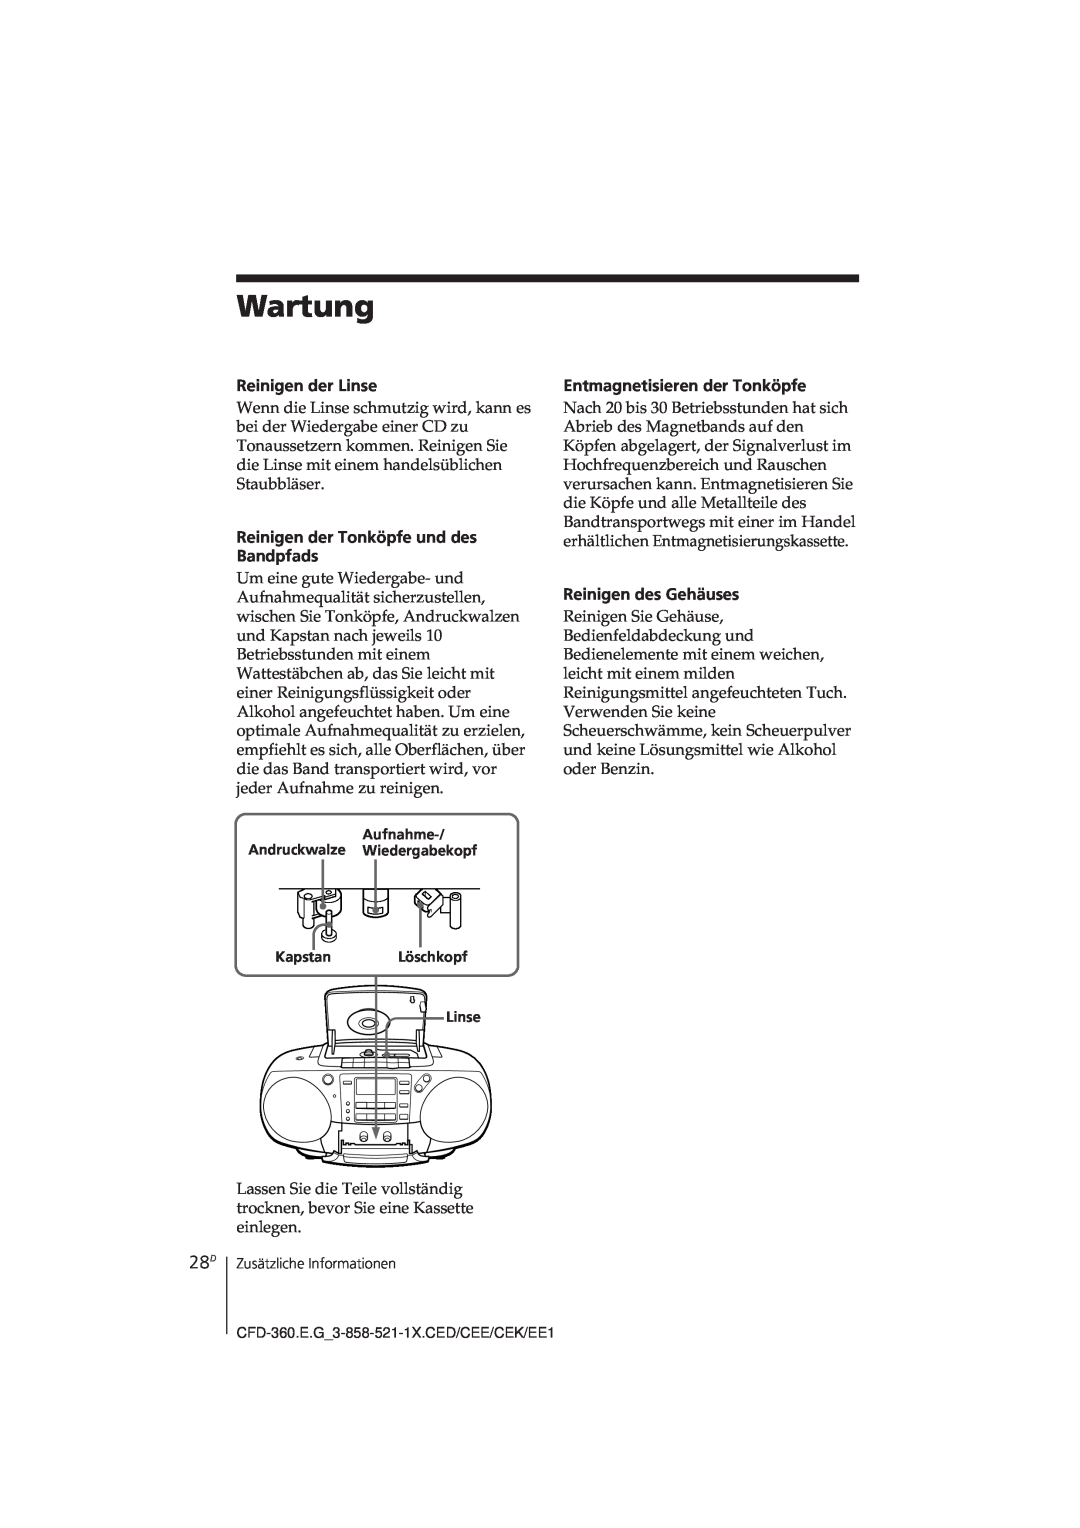 Sony CFD-360 operating instructions Wartung 